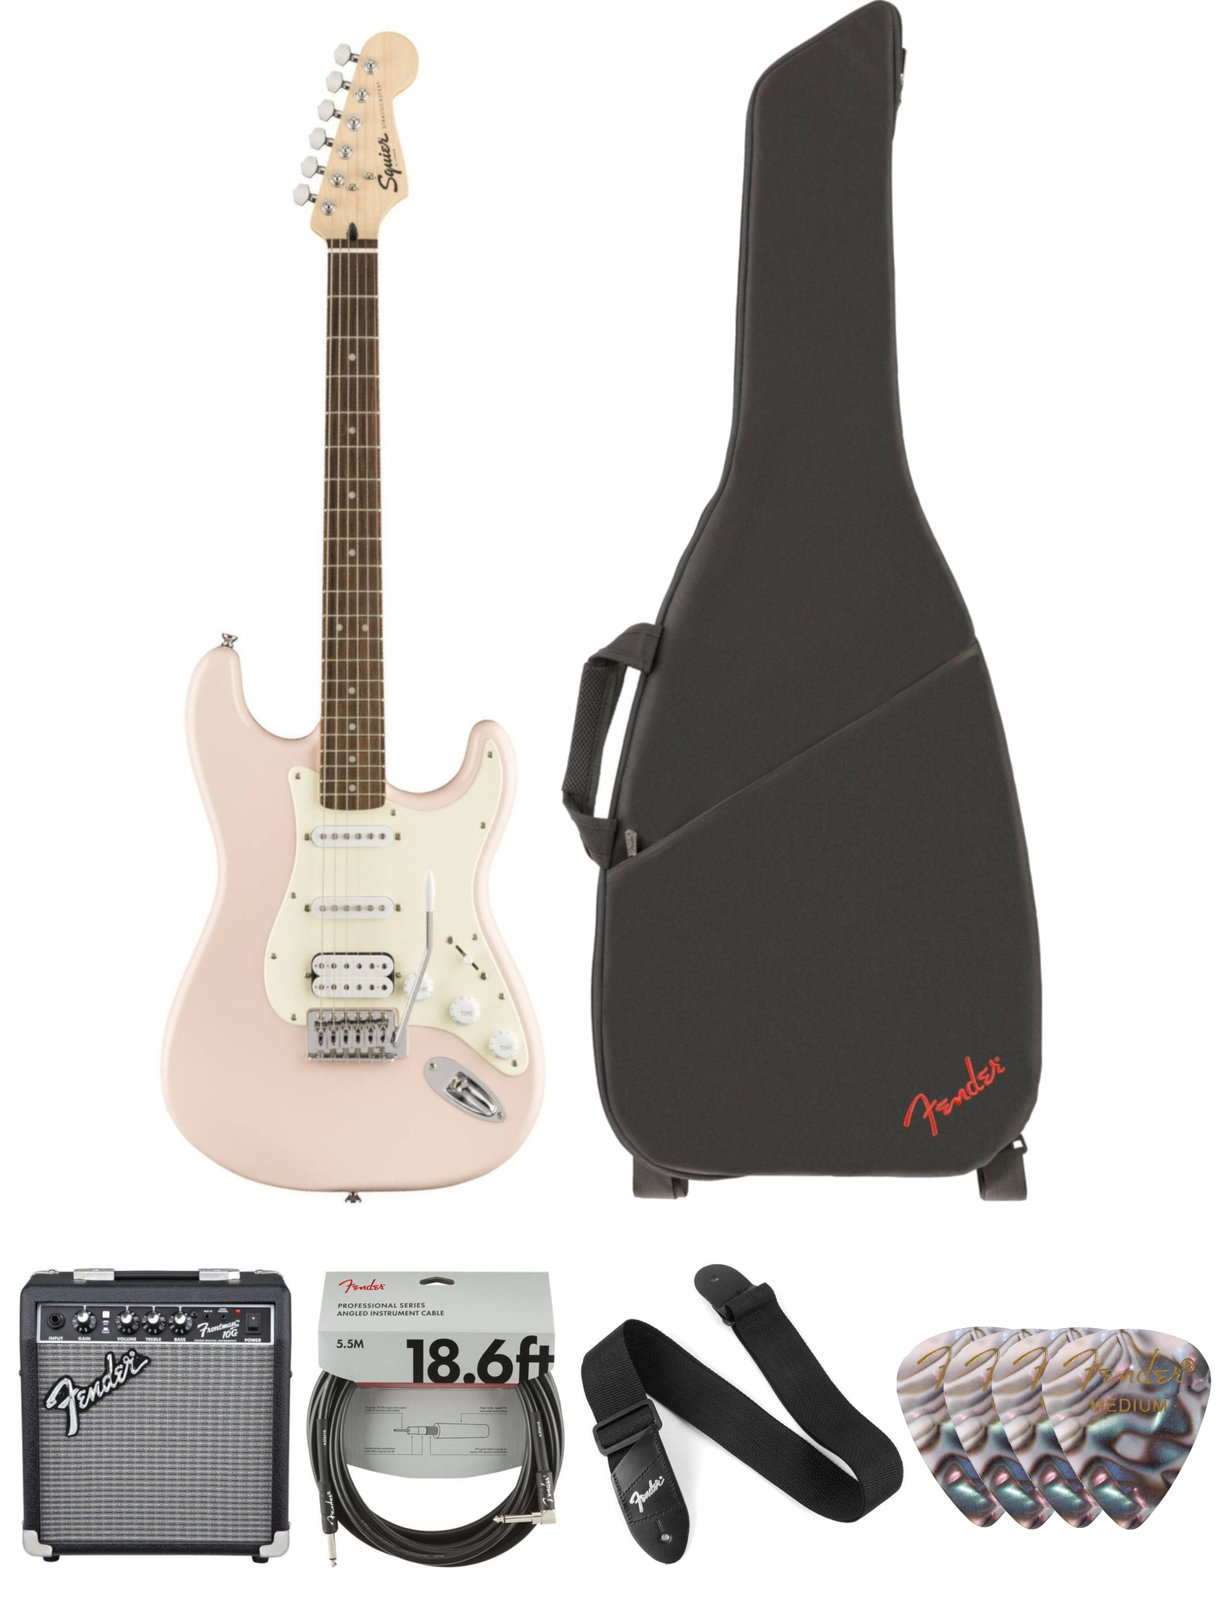 Guitarra elétrica Fender Squier Bullet Stratocaster Tremolo HSS IL Shell Pink Deluxe SET Shell Pink